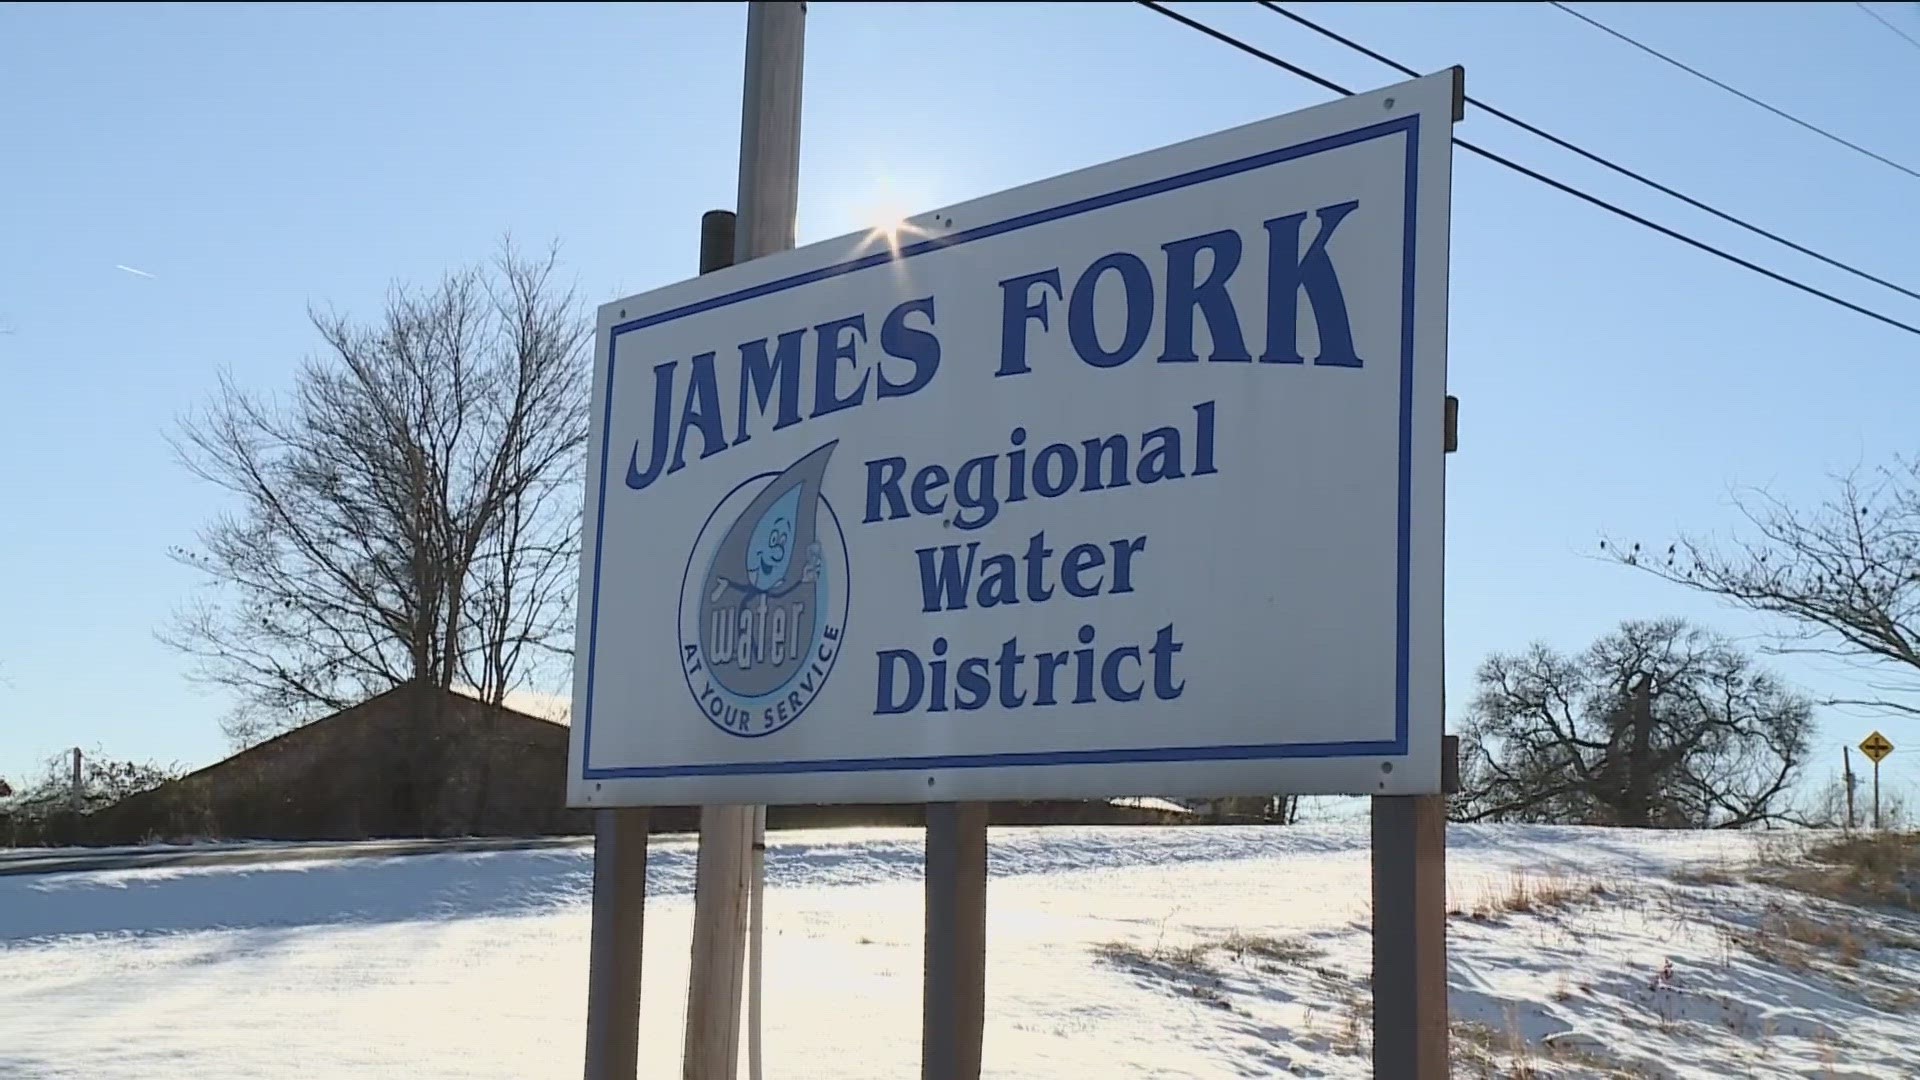 THE JAMES FORK REGIONAL WATER DISTRICT SAYS ITS SYSTEM IS BEING STRESSED DUE TO THE EXTREME COLD.